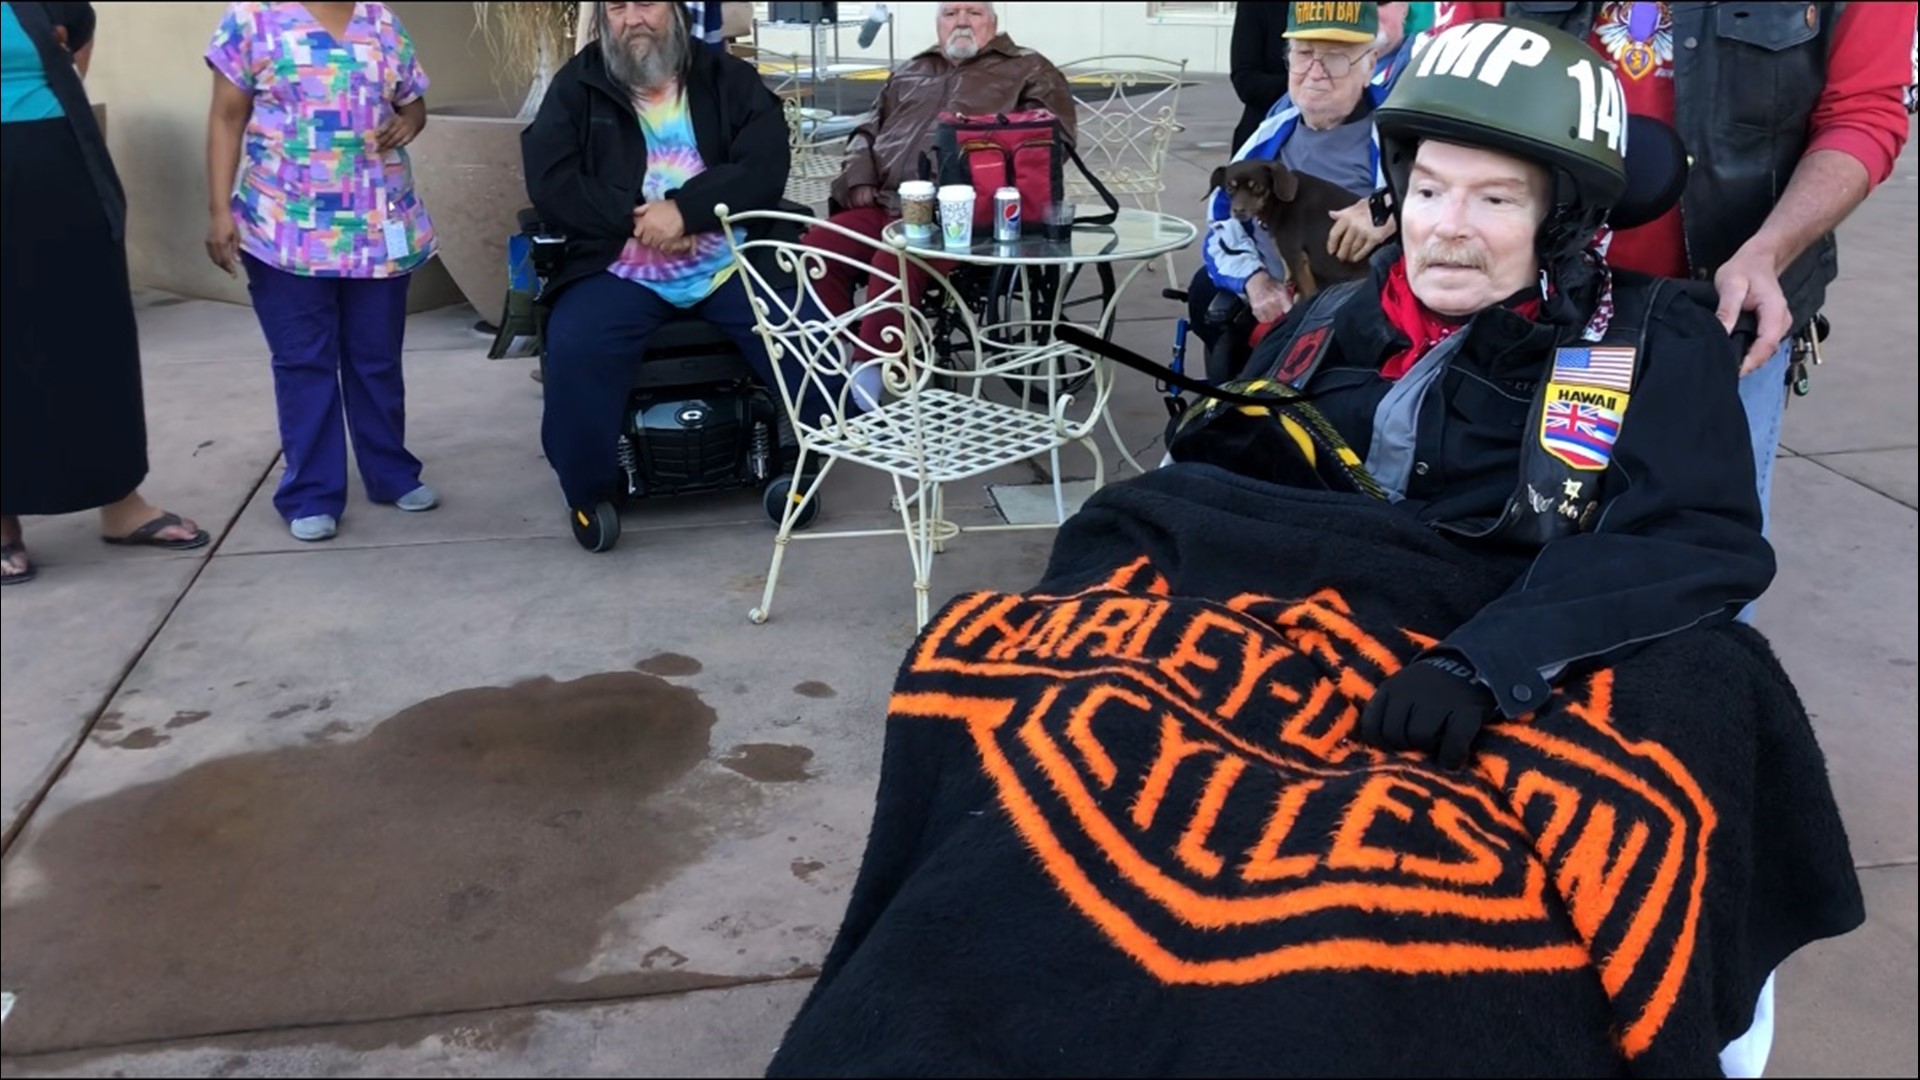 Vietnam vet Ken Jones served three tours in Vietnam with the army. After some health problems, he is in hospice care. Ken told his wife his dying wish is to ride a motorcycle one last time, and you wouldn't believe the community that rallied to make that happen.